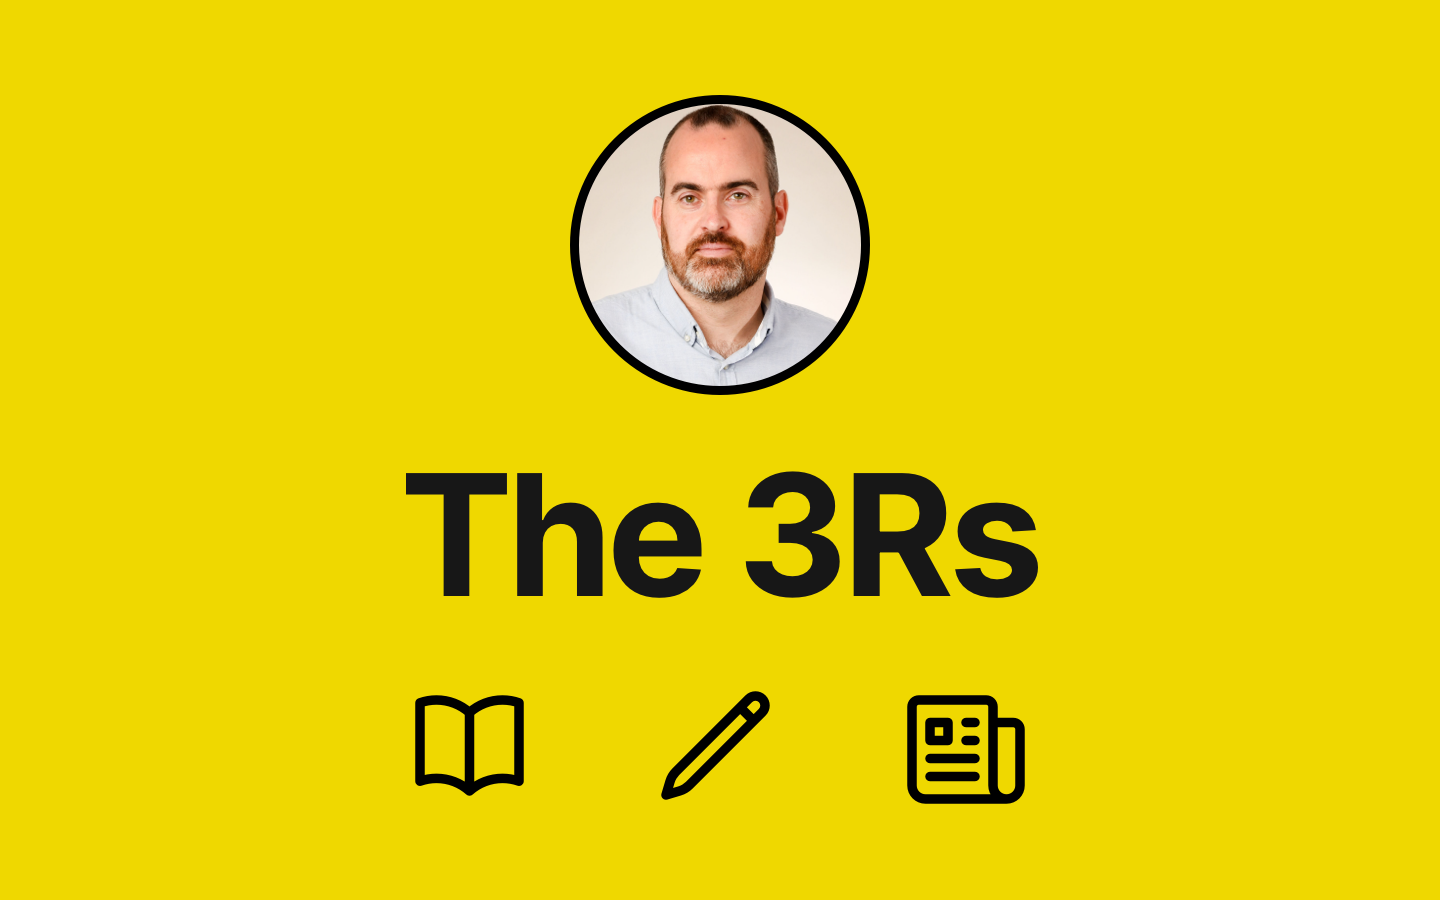 The 3Rs - Reading, writing, and research to be interested in #44 feature image